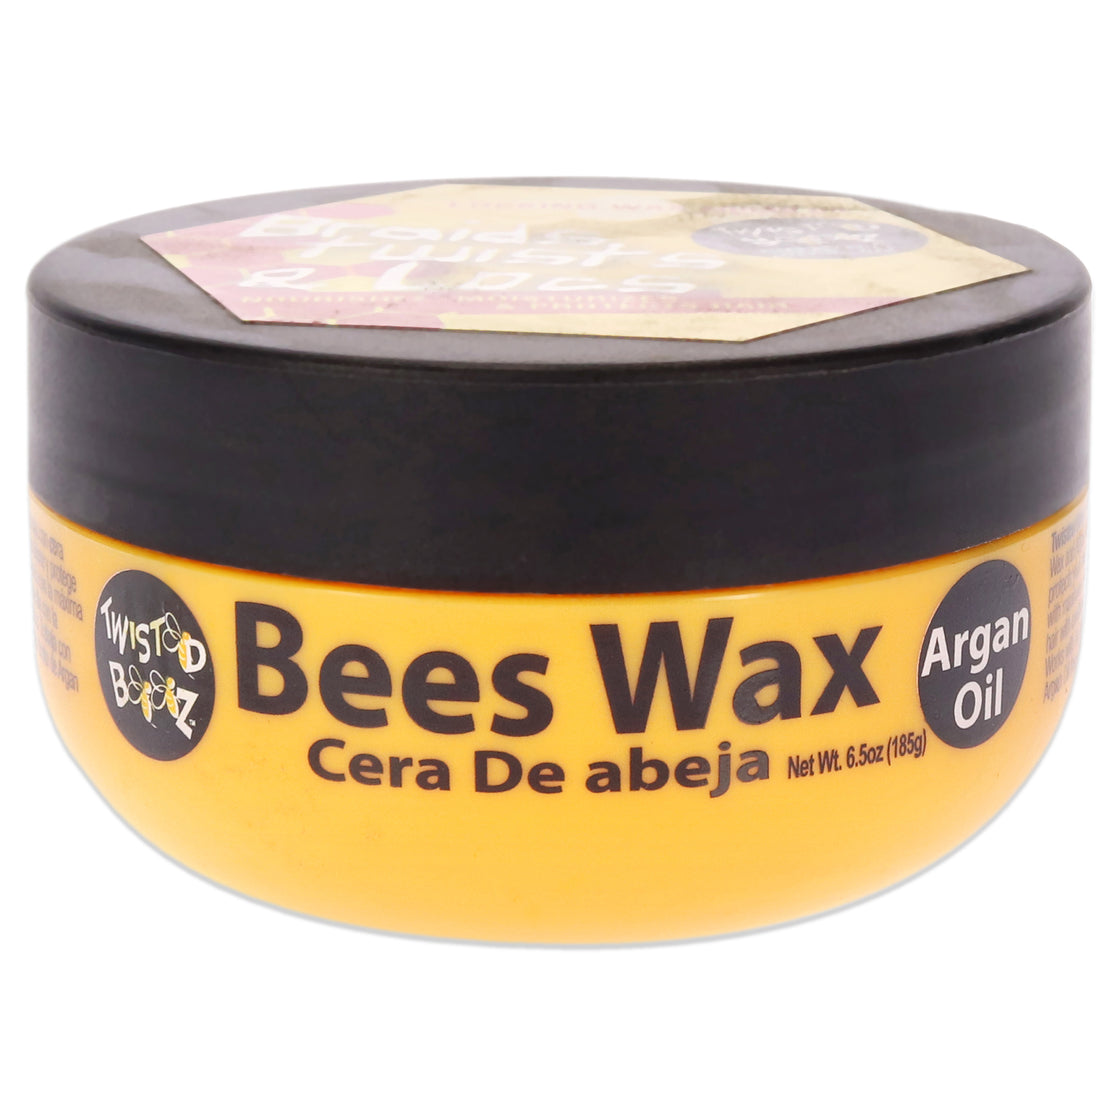 Twisted Bees Wax - Arganoil by Ecoco for Unisex - 6.5 oz Wax